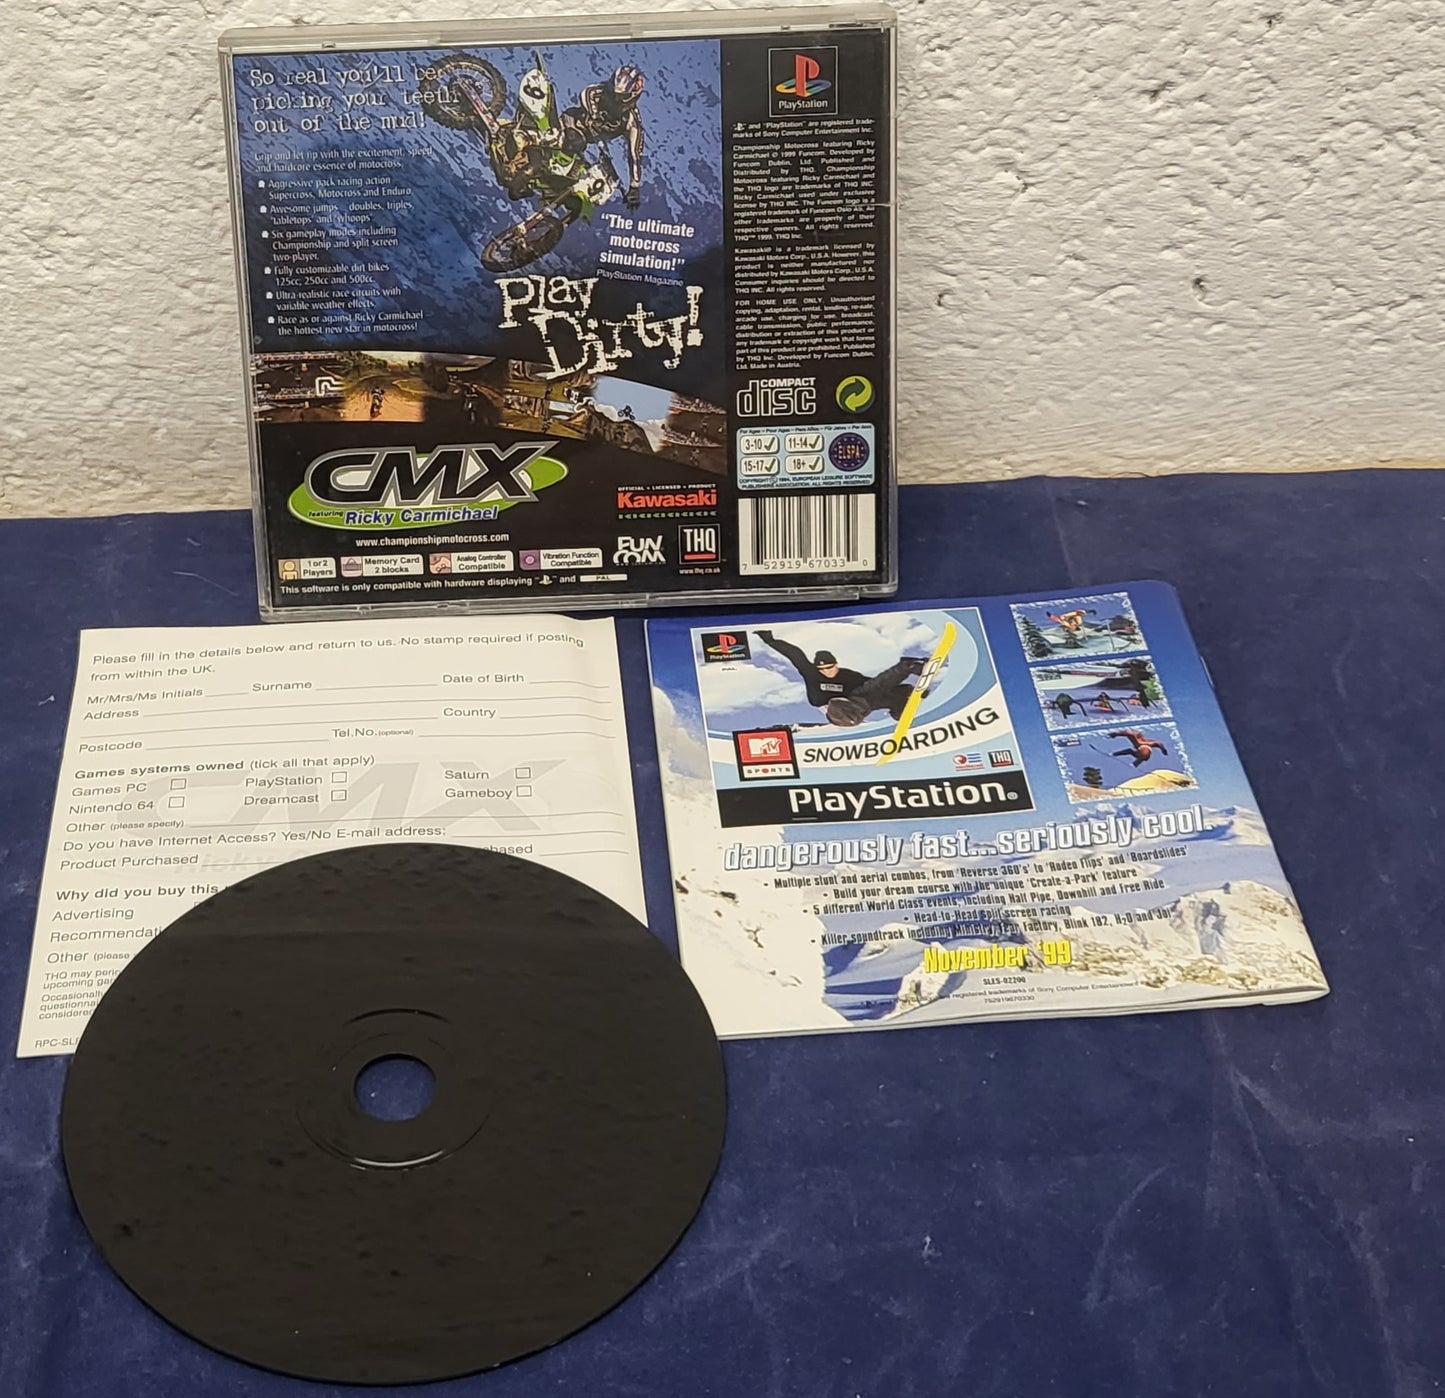 Championship Motocross Featuring Ricky Carmichael Sony Playstation 1 (PS1) Game